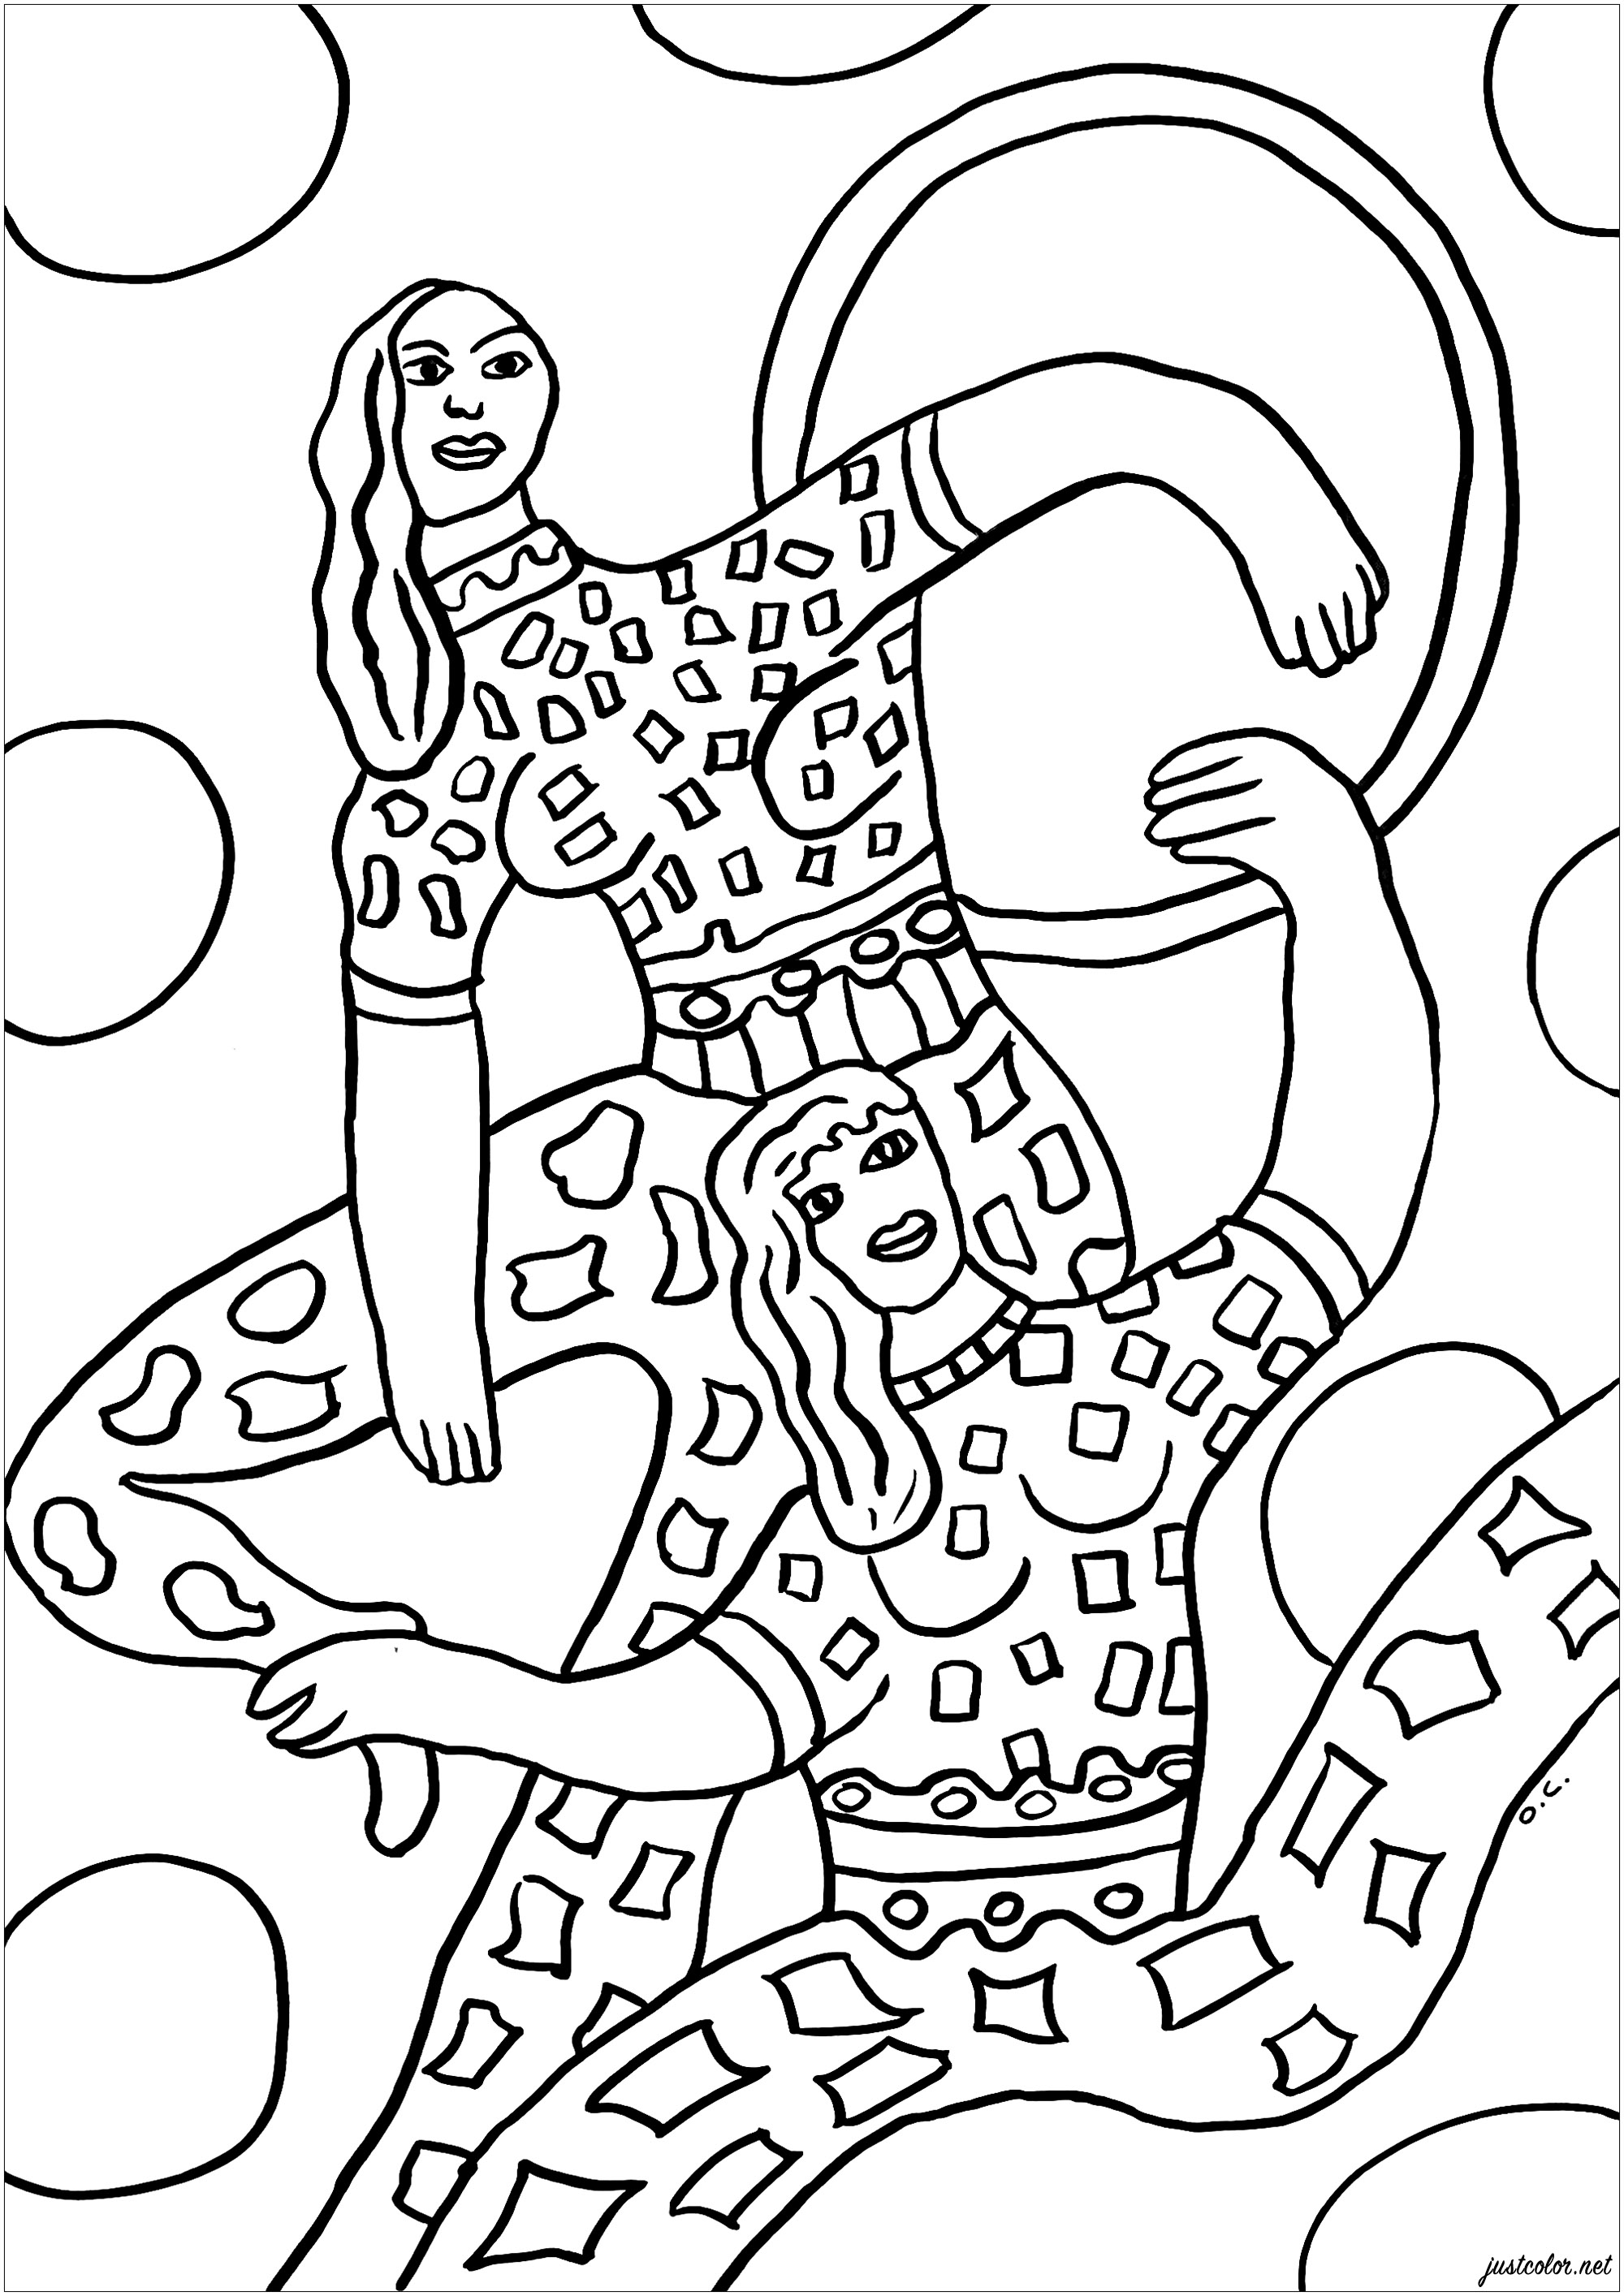 Coloring page created from Cirque by Fernand Léger (1950).  Original illustration to see at Musée Matisse (Cateau-Cambraisis, Nord, France)